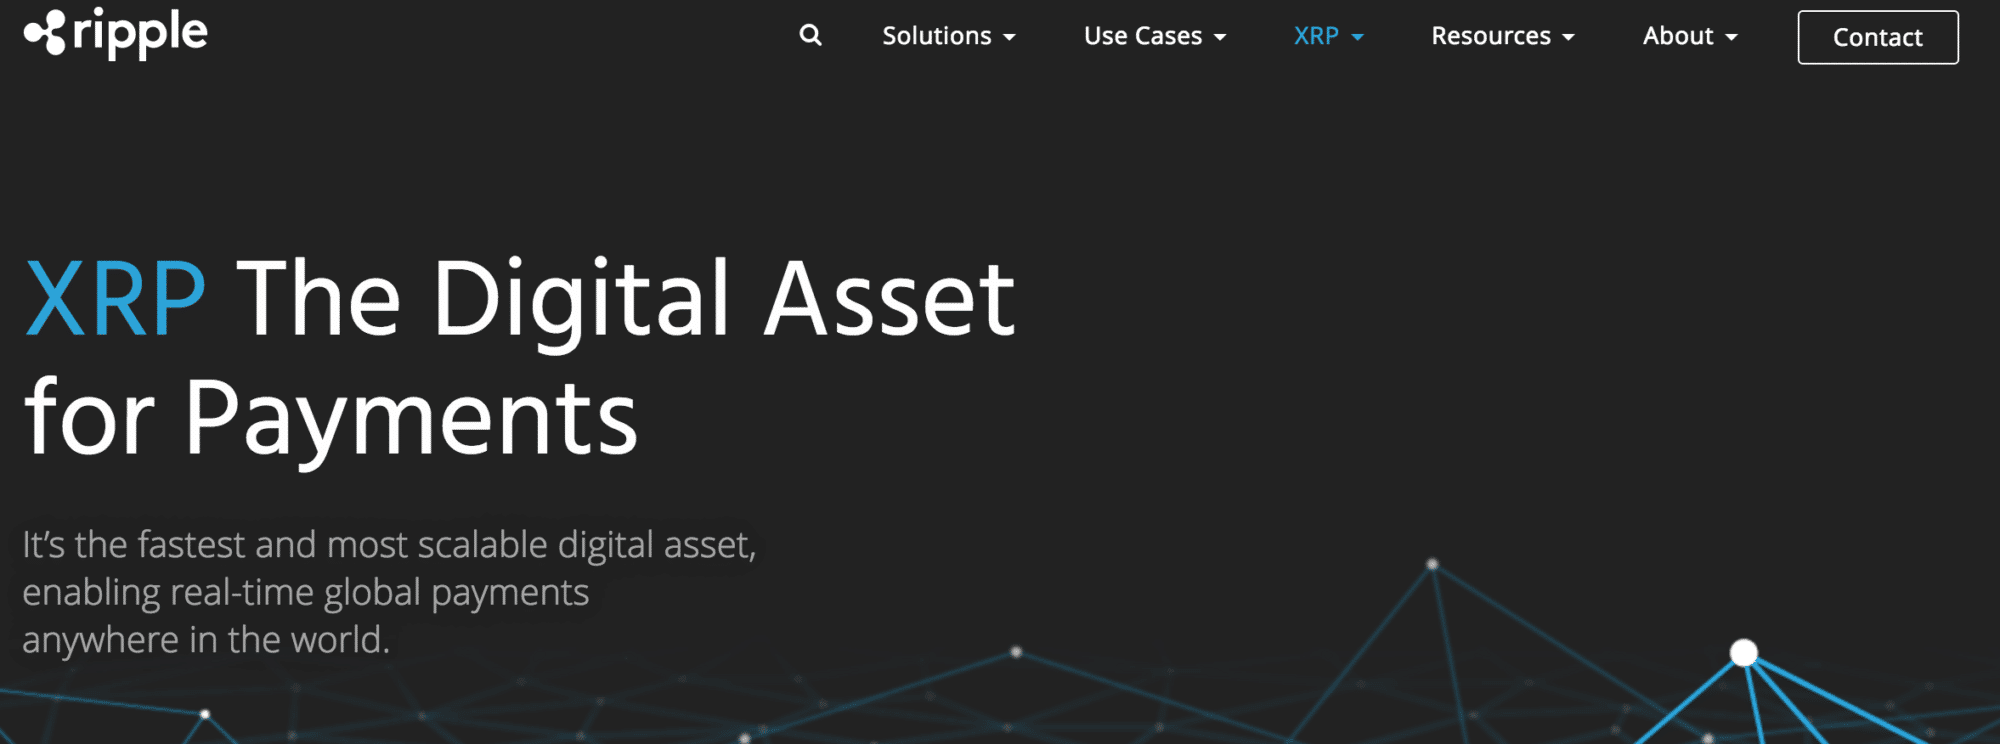 ripple home page